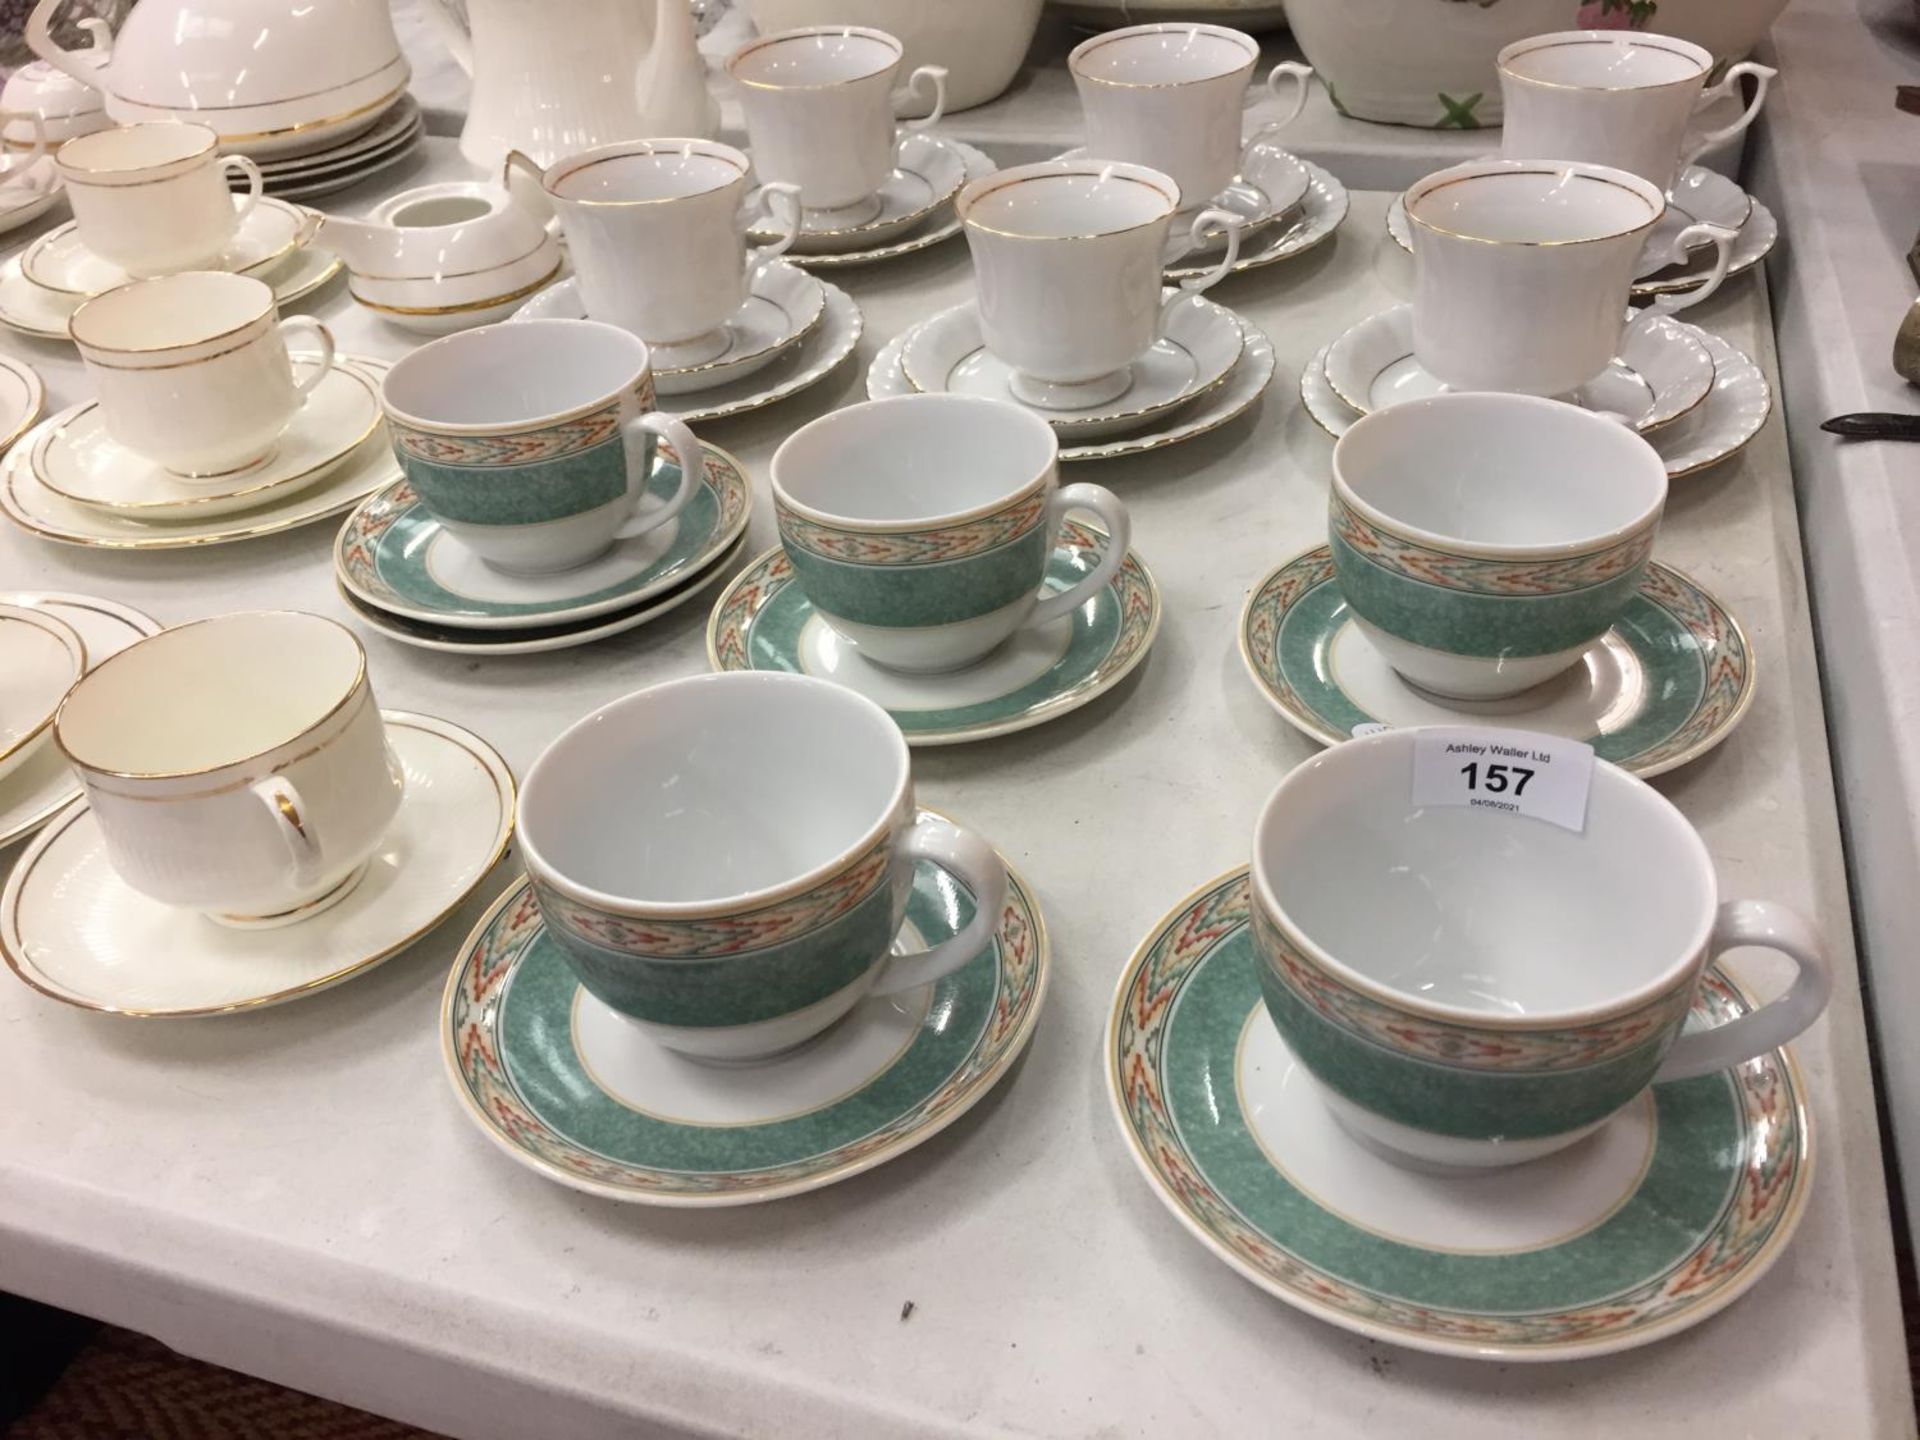 A LARGE COLLECTION OF VARIOUS TEA CUPS AND SAUCERS OF VARIOUS DESIGNS AND TWO TEAPOTS - Image 2 of 4